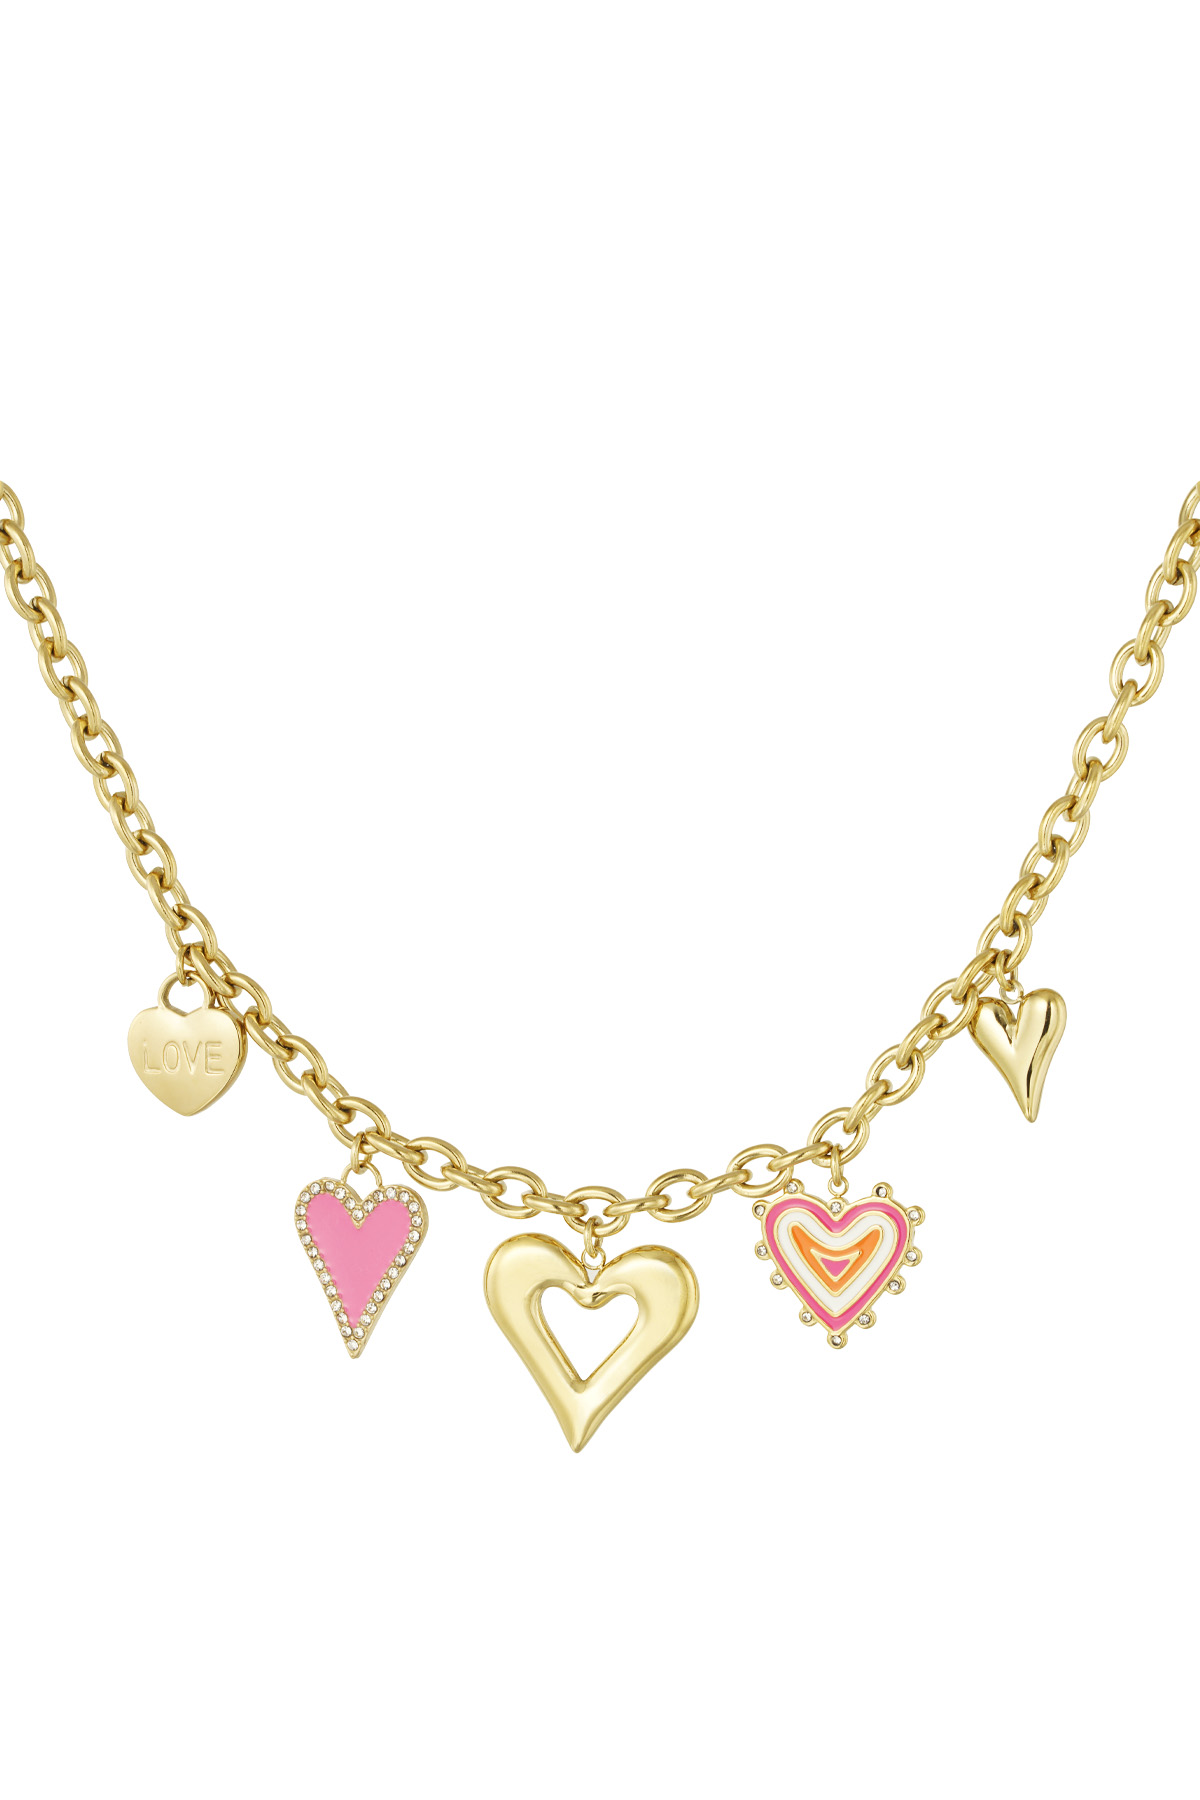 Charm necklace love always wins - gold 